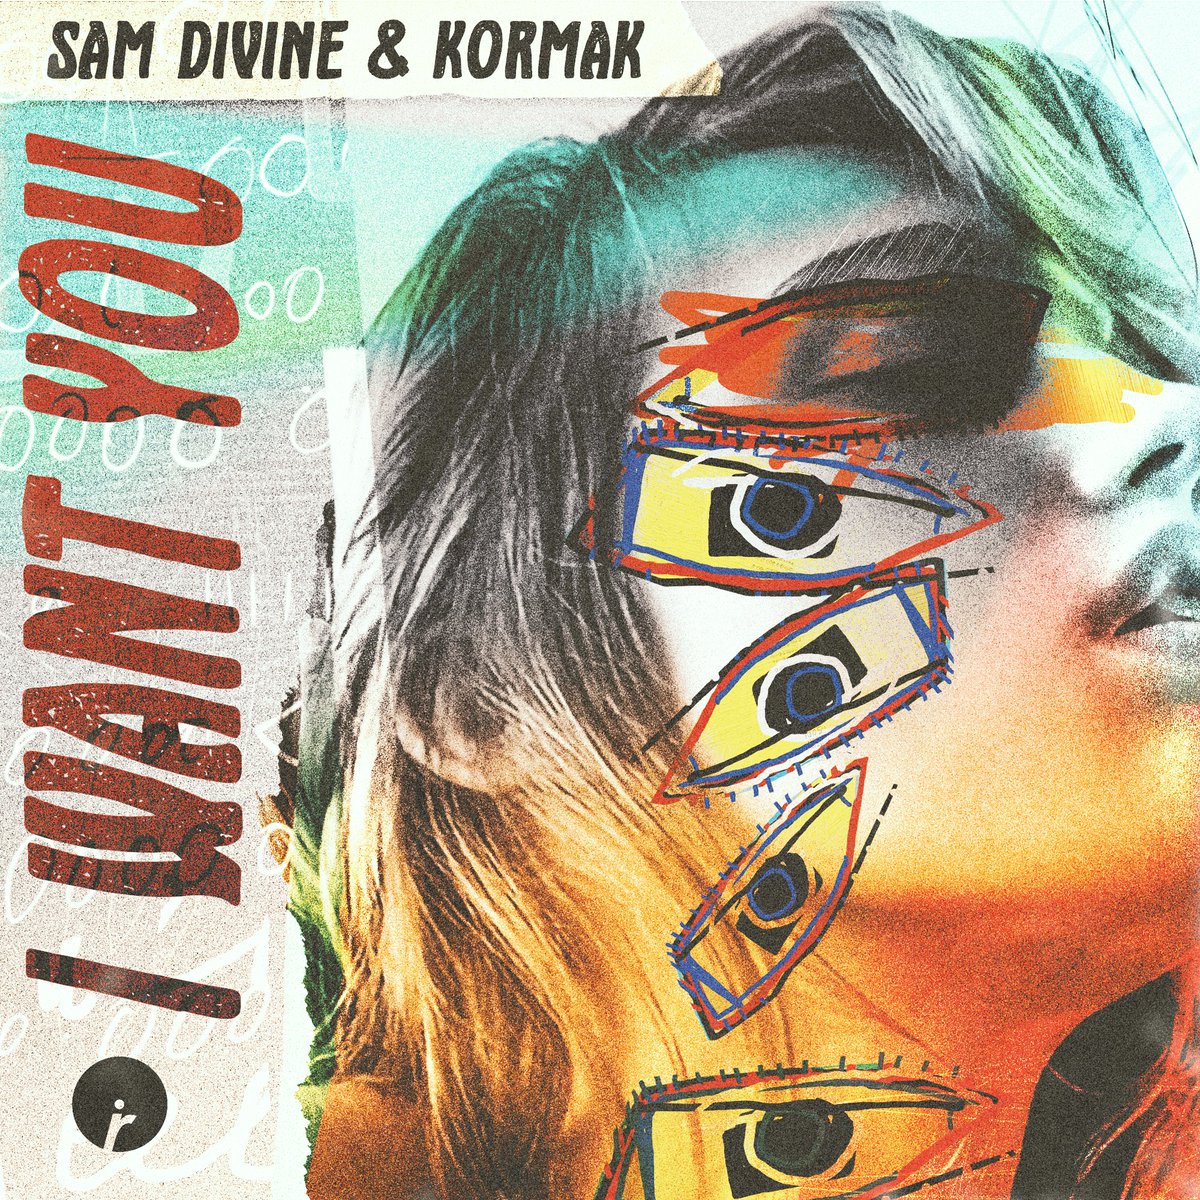 So much heat this summer… 🔥 Are you ready for another scorcher ⁉️ We are ECSTATIC to welcome @samdivine & @OFFICIALKORMAK to the #InsomniacRecs family with their long-awaited collab, “I Want You” this Friday! 🎶❤️ → insom.co/IWantYou